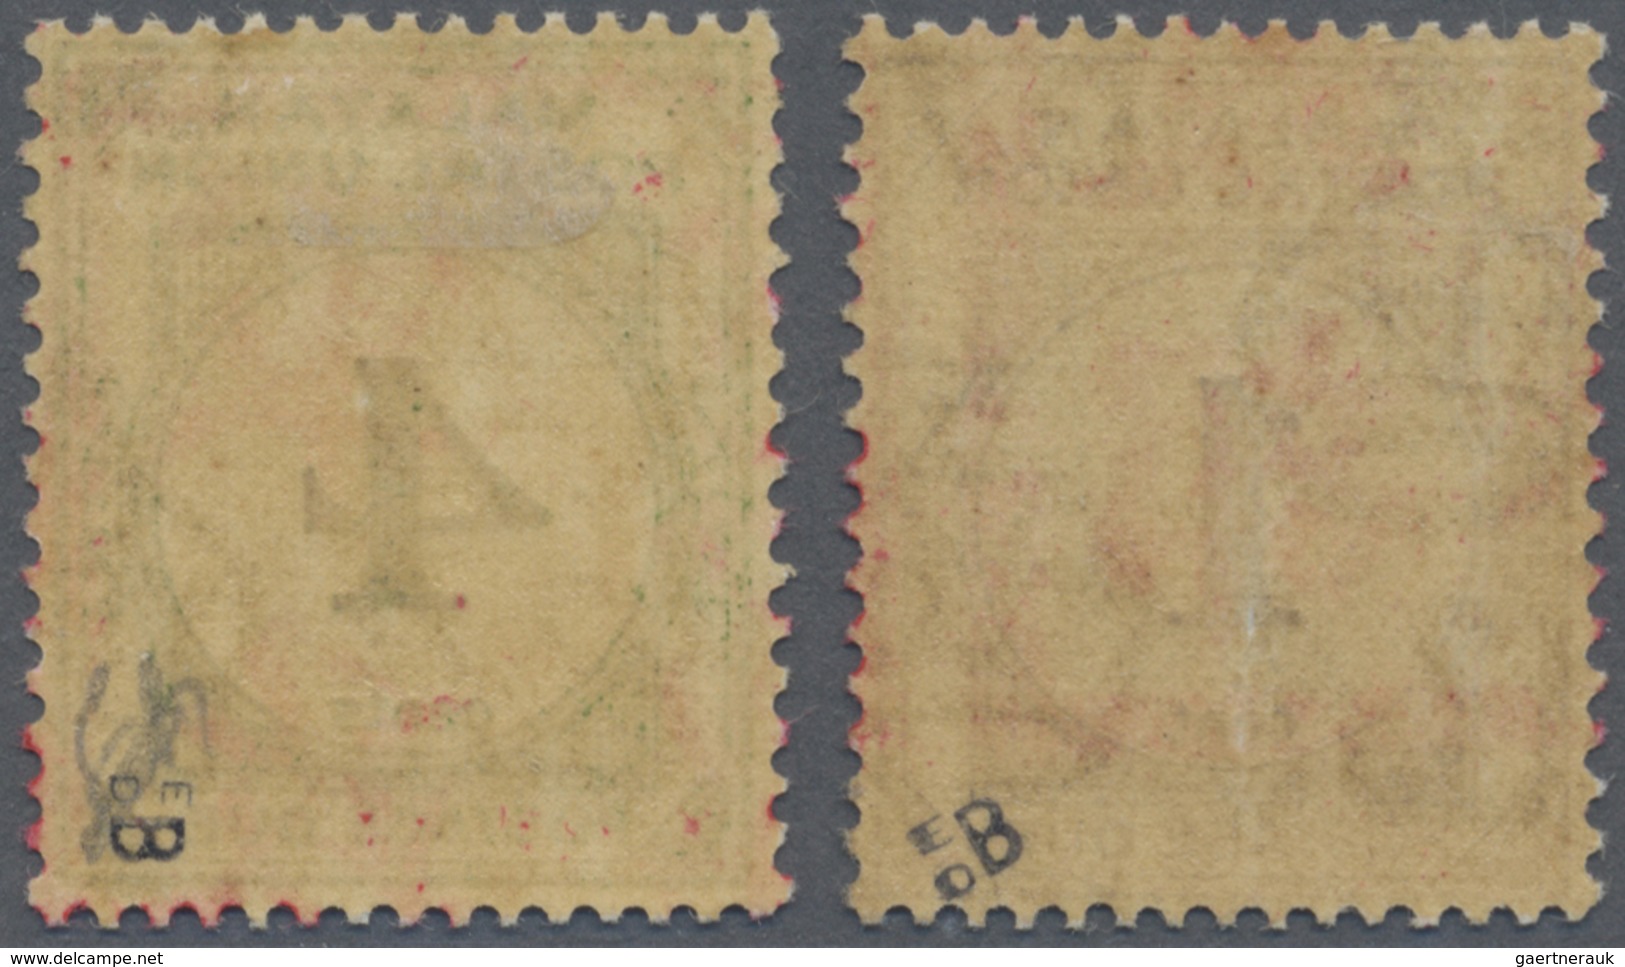 * Malaiische Staaten - Malakka: 1942 Japanese Occupation: Postage Due Stamps Of Malay Postal Union 1c. - Malacca